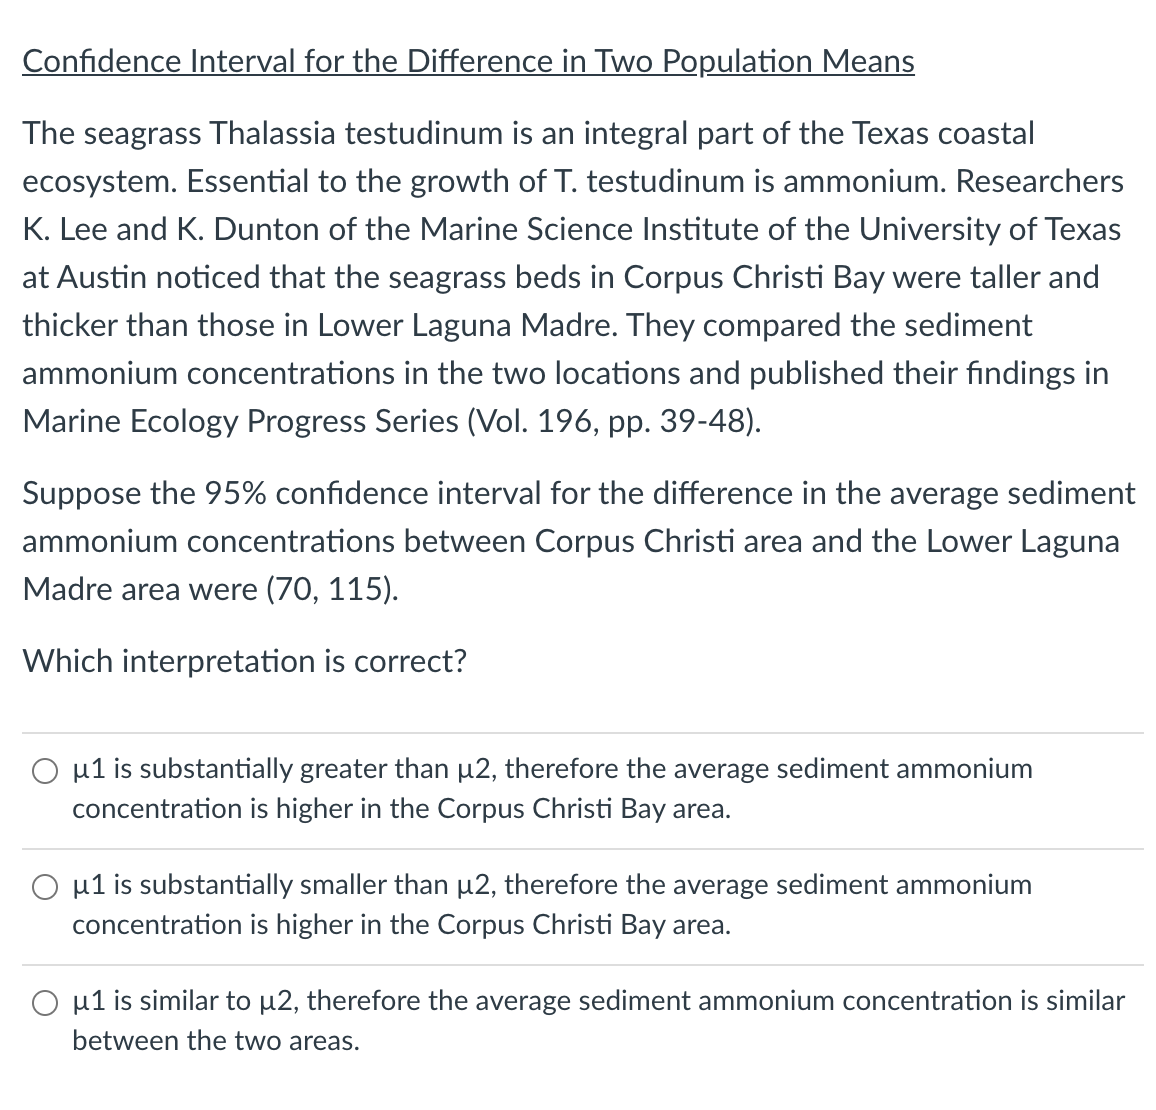 Confidence Interval for the Difference in Two Population Means
The seagrass Thalassia testudinum is an integral part of the Texas coastal
ecosystem. Essential to the growth of T. testudinum is ammonium. Researchers
K. Lee and K. Dunton of the Marine Science Institute of the University of Texas
at Austin noticed that the seagrass beds in Corpus Christi Bay were taller and
thicker than those in Lower Laguna Madre. They compared the sediment
ammonium concentrations in the two locations and published their findings in
Marine Ecology Progress Series (Vol. 196, pp. 39-48).
Suppose the 95% confidence interval for the difference in the average sediment
ammonium concentrations between Corpus Christi area and the Lower Laguna
Madre area were (70, 115).
Which interpretation is correct?
O u1 is substantially greater than µ2, therefore the average sediment ammonium
concentration is higher in the Corpus Christi Bay area.
O u1 is substantially smaller than µ2, therefore the average sediment ammonium
concentration is higher in the Corpus Christi Bay area.
O u1 is similar to µ2, therefore the average sediment ammonium concentration is similar
between the two areas.
